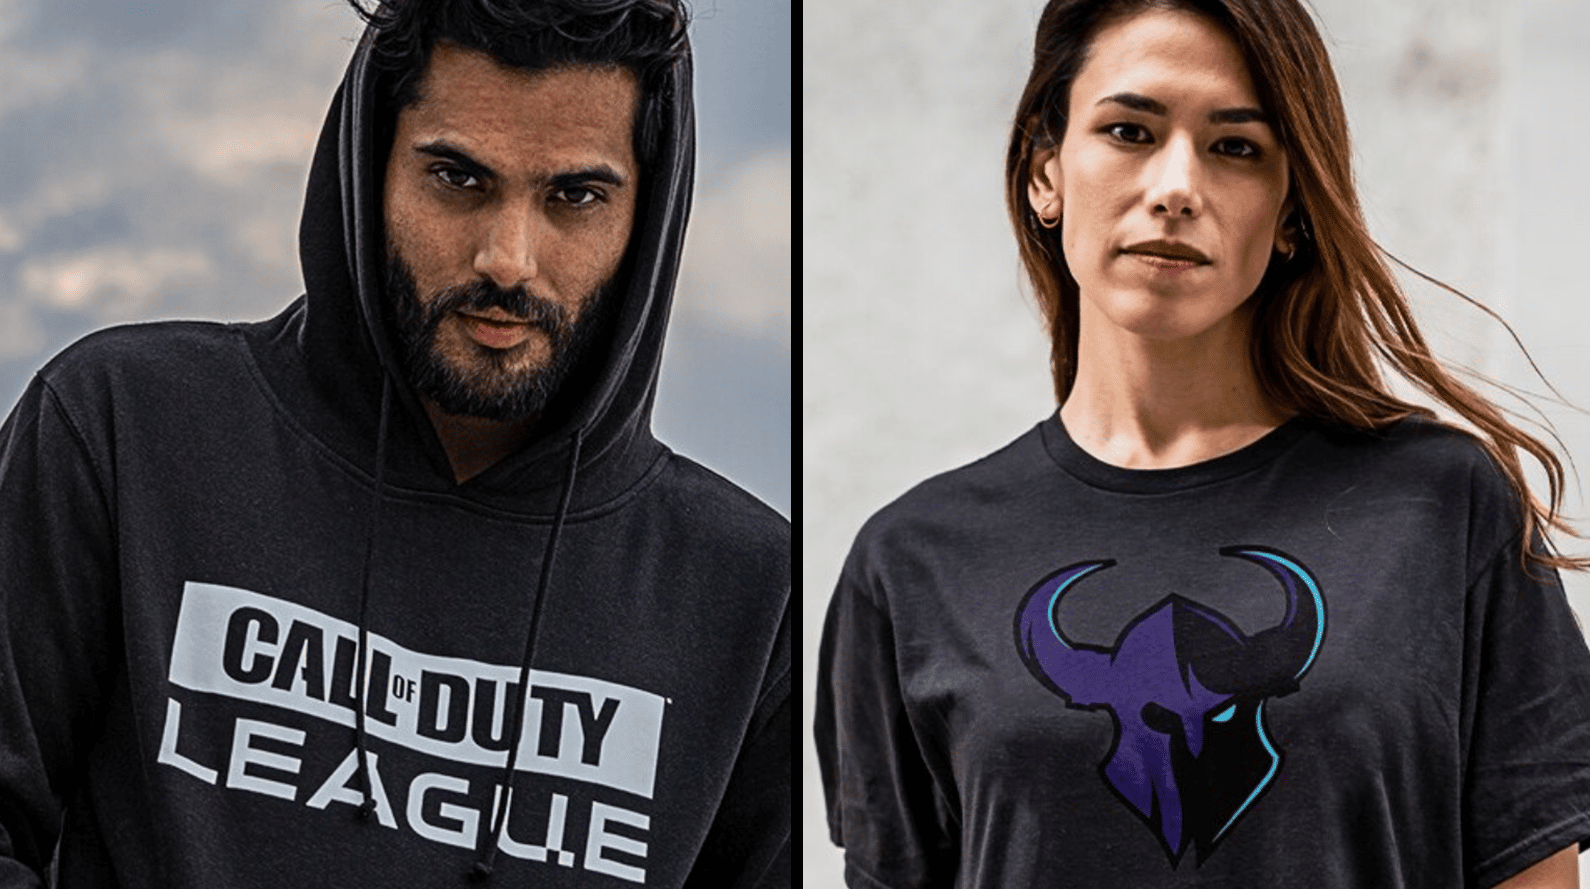 Call of Duty League store reveals new merchandise